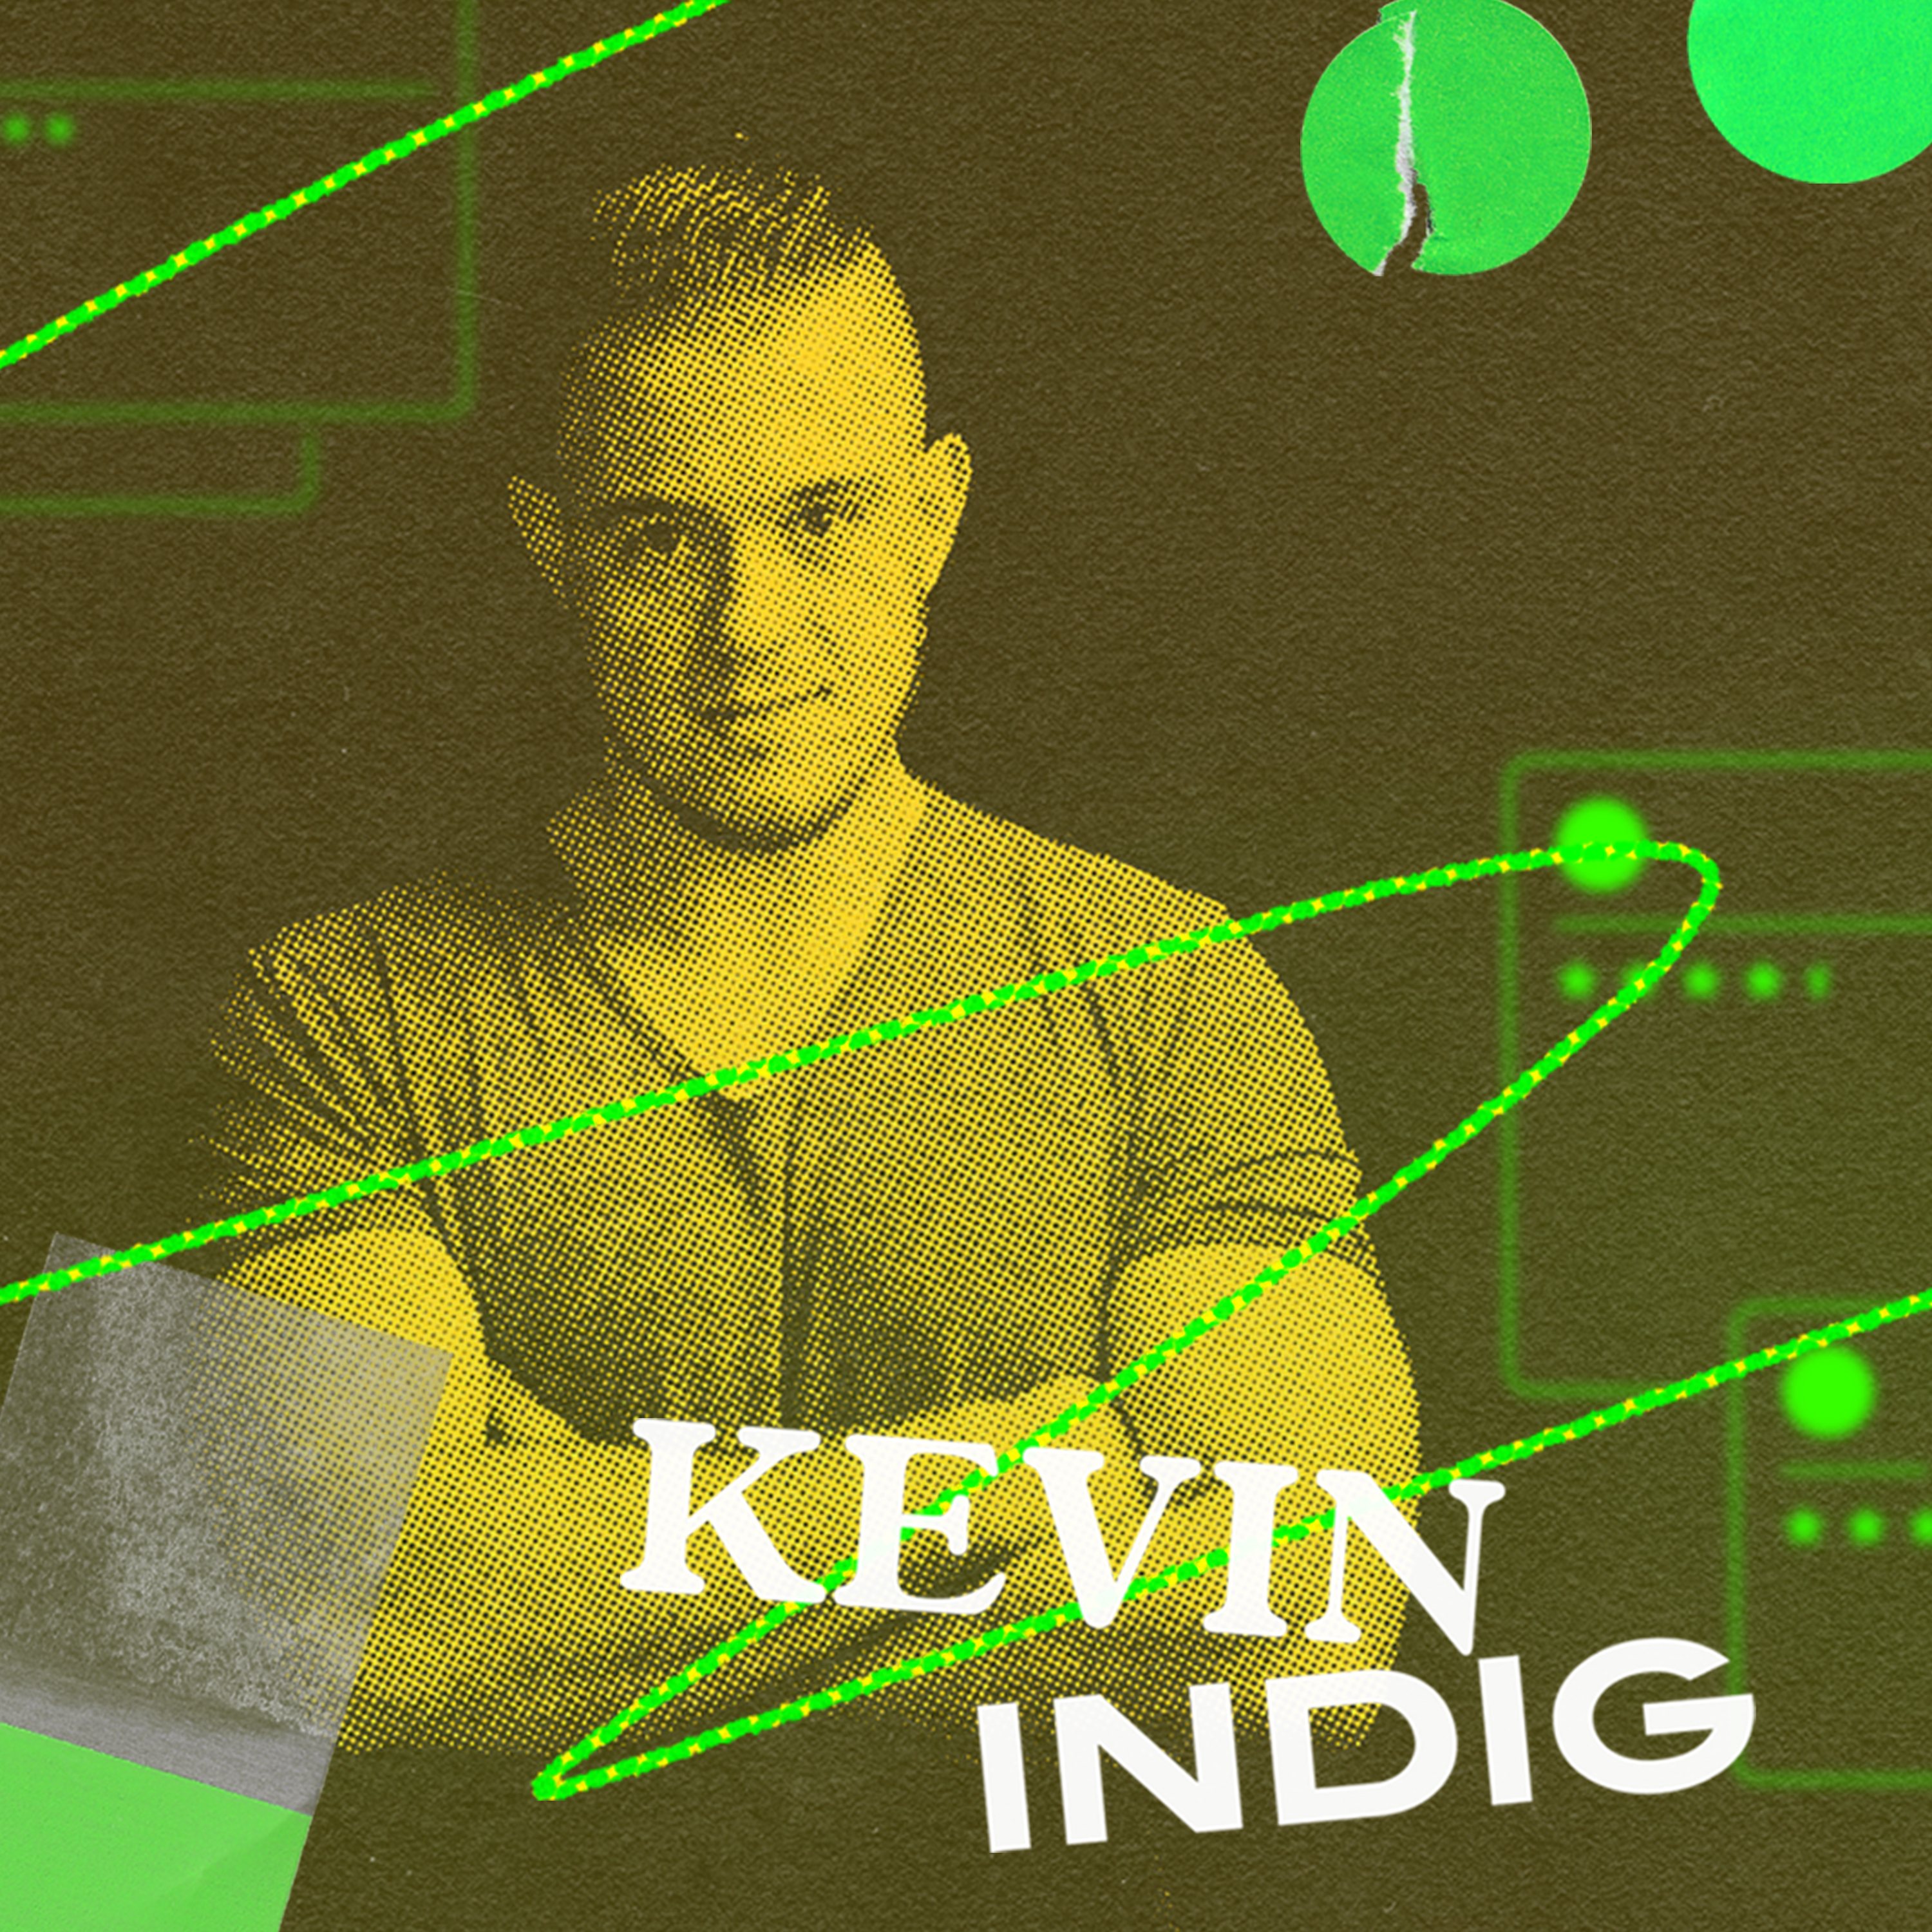 G2's Kevin Indig on searching for meaning and the meaning of search